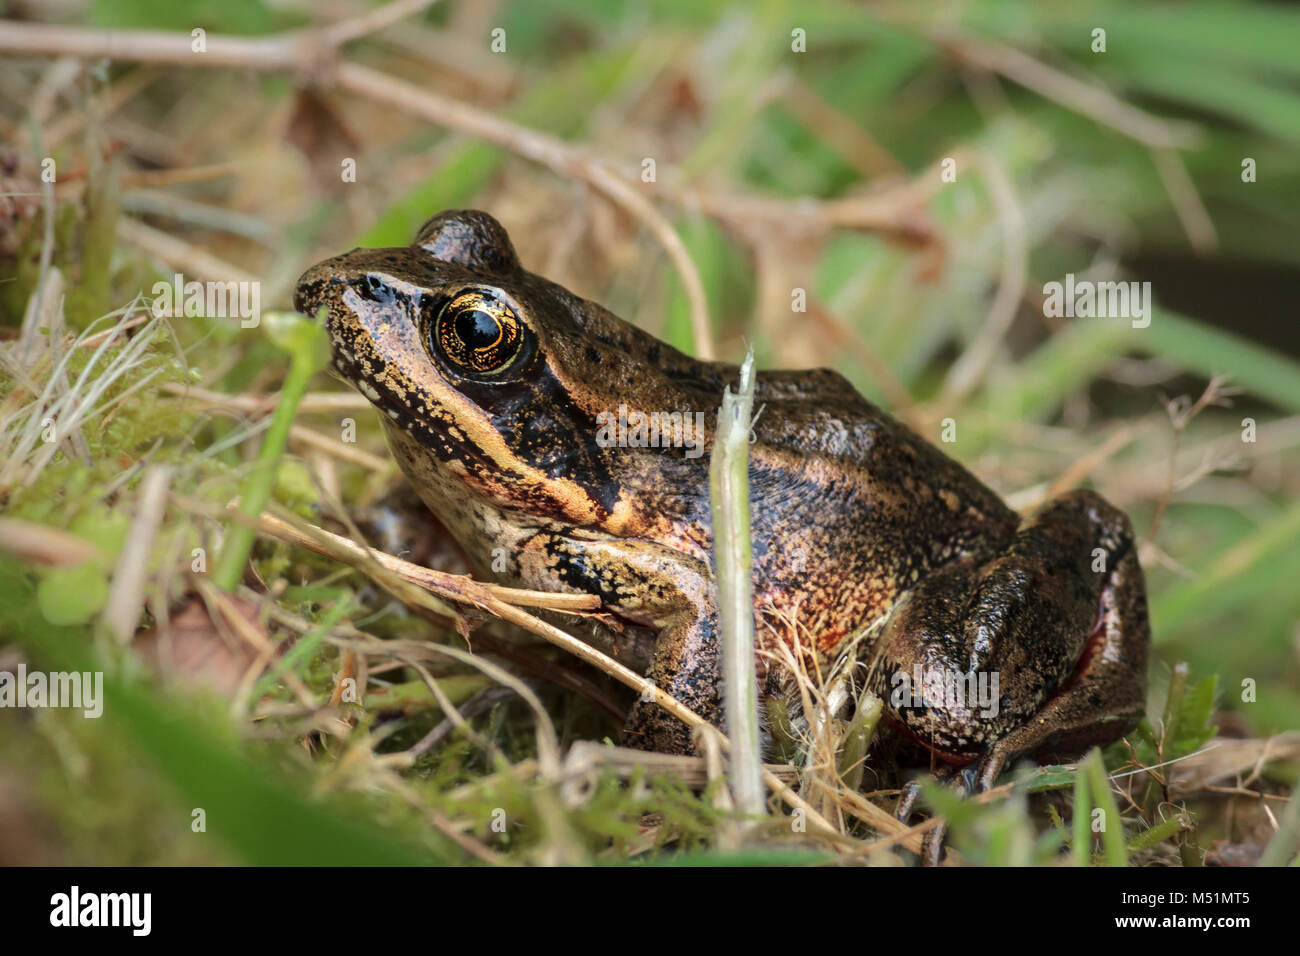 On a sunny spring day, a large Northern red-legged frog sits on the bank of a pond, partly camouflaged among a tangle of grasses and other vegetation. Stock Photo